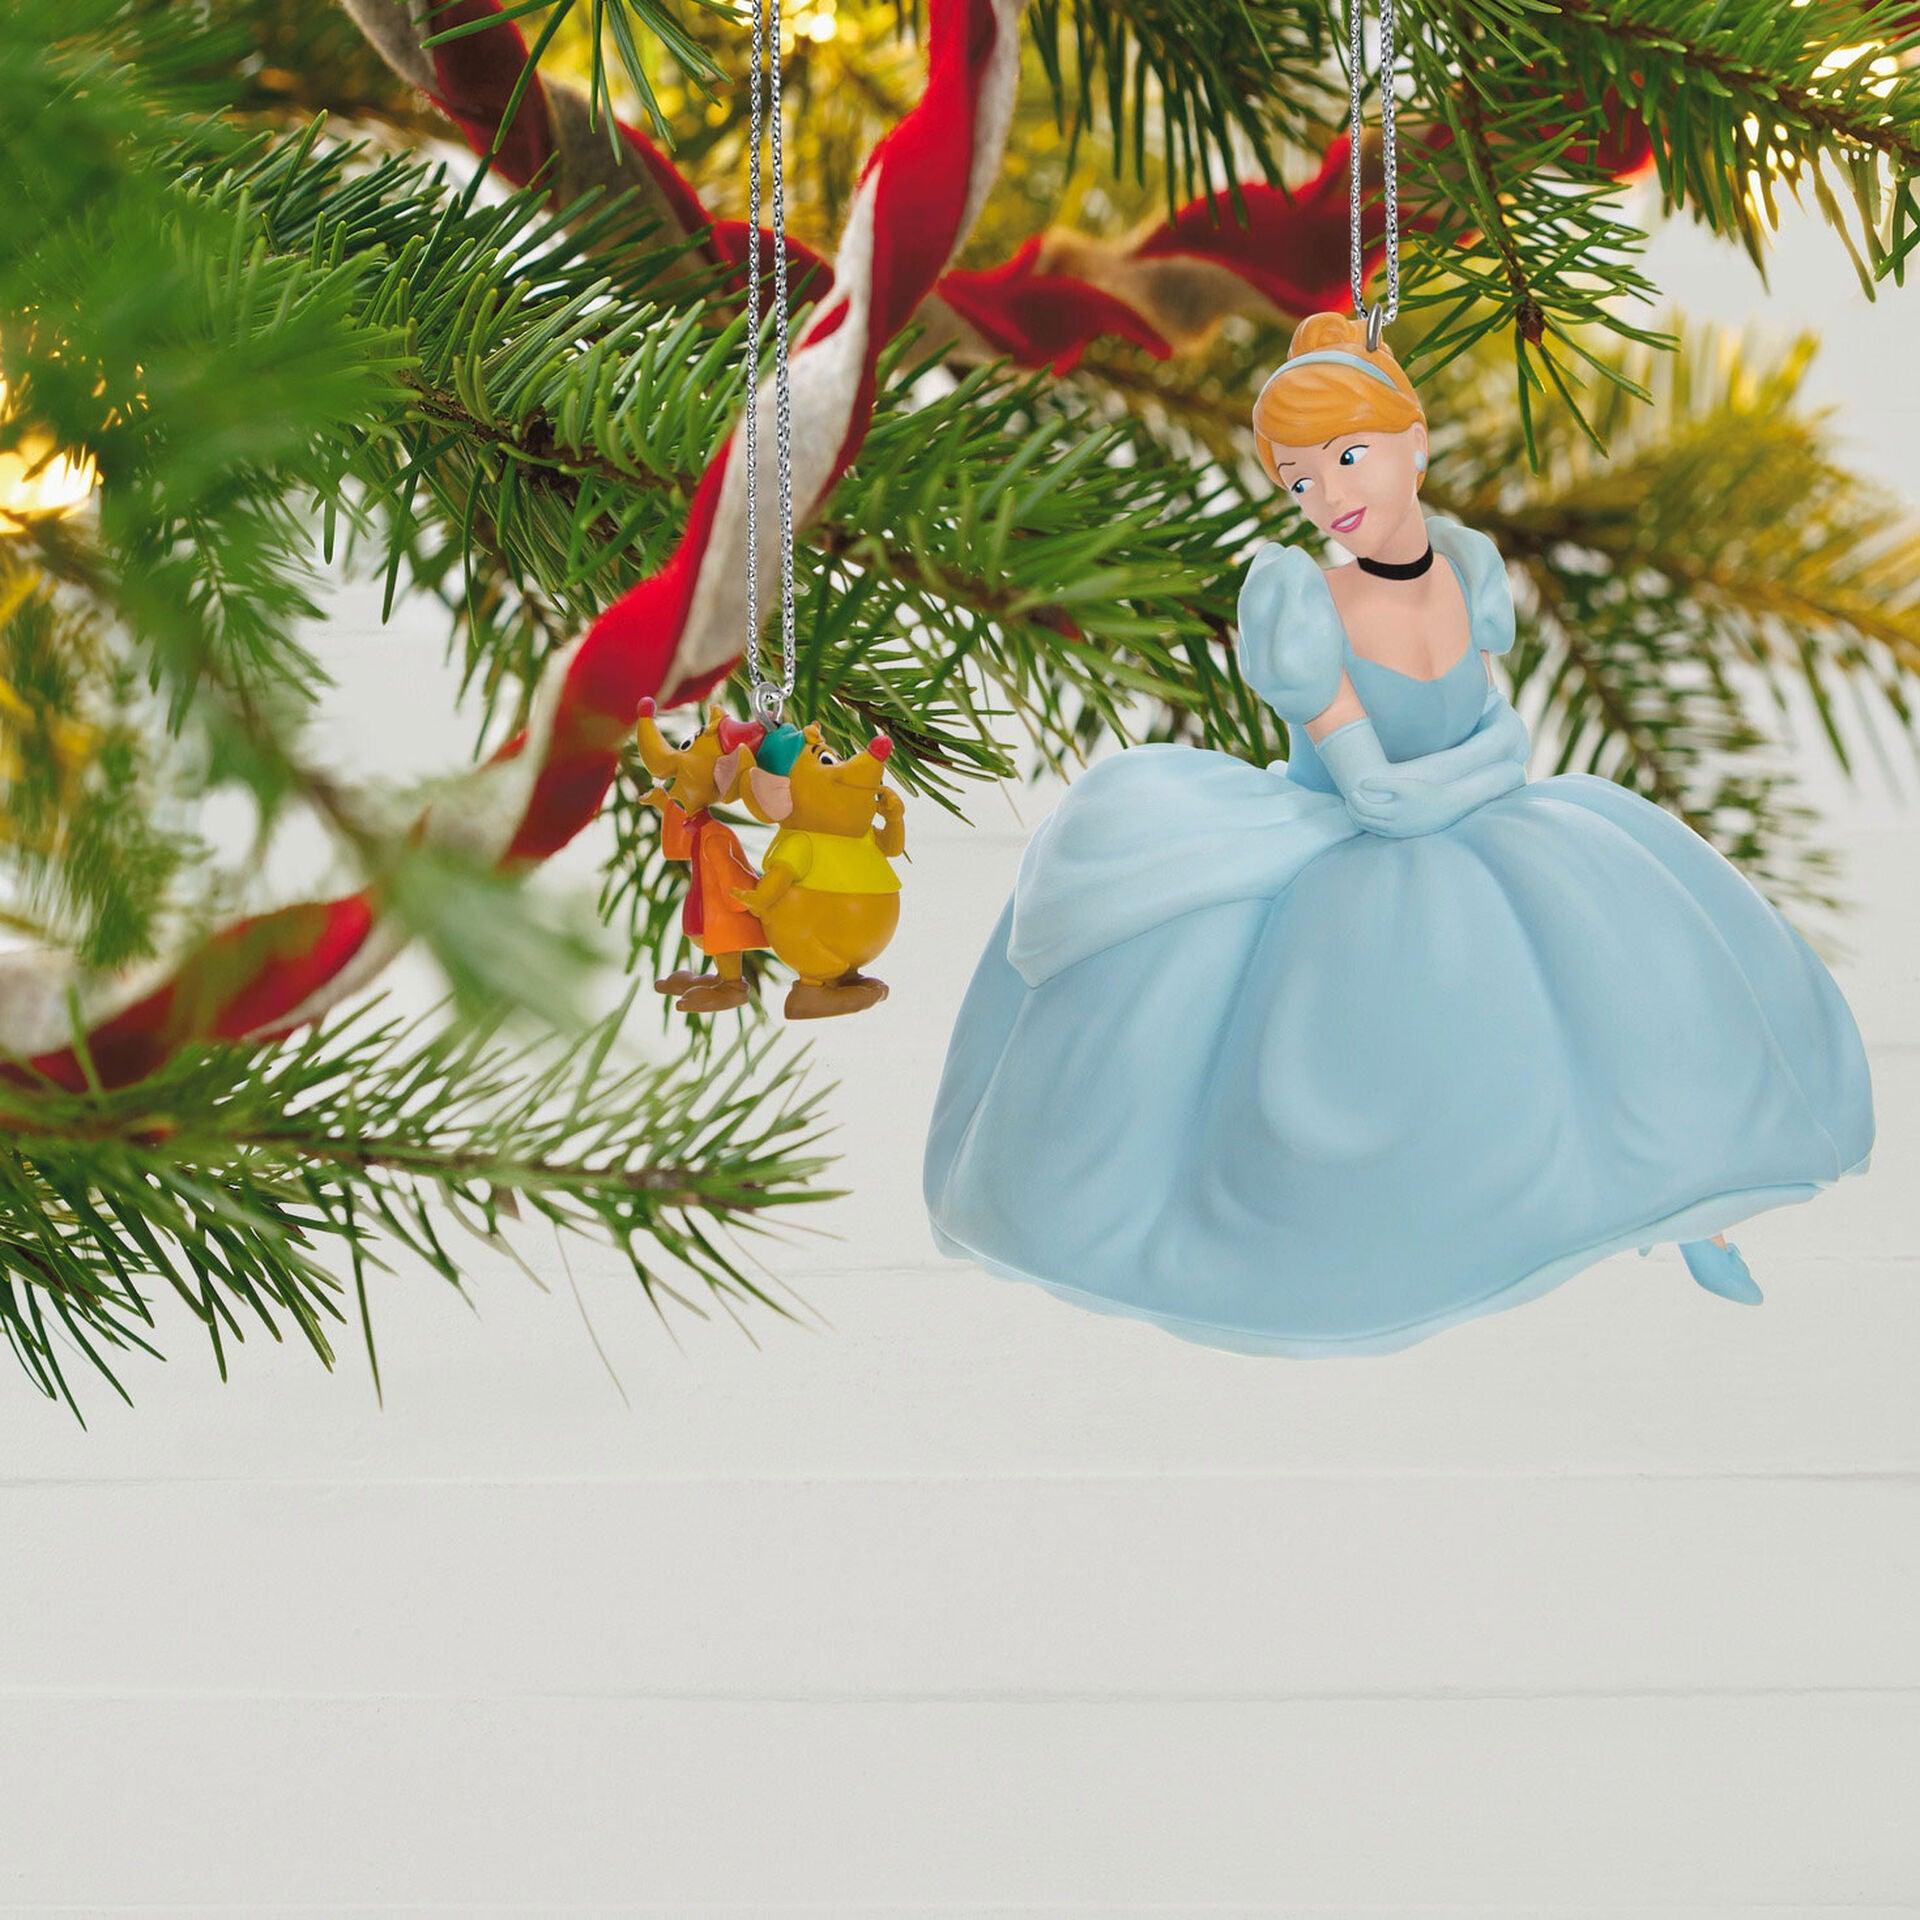 Disney Cinderella Jaq and Gus Love Cinderelly Christmas Ornaments, Set of 2